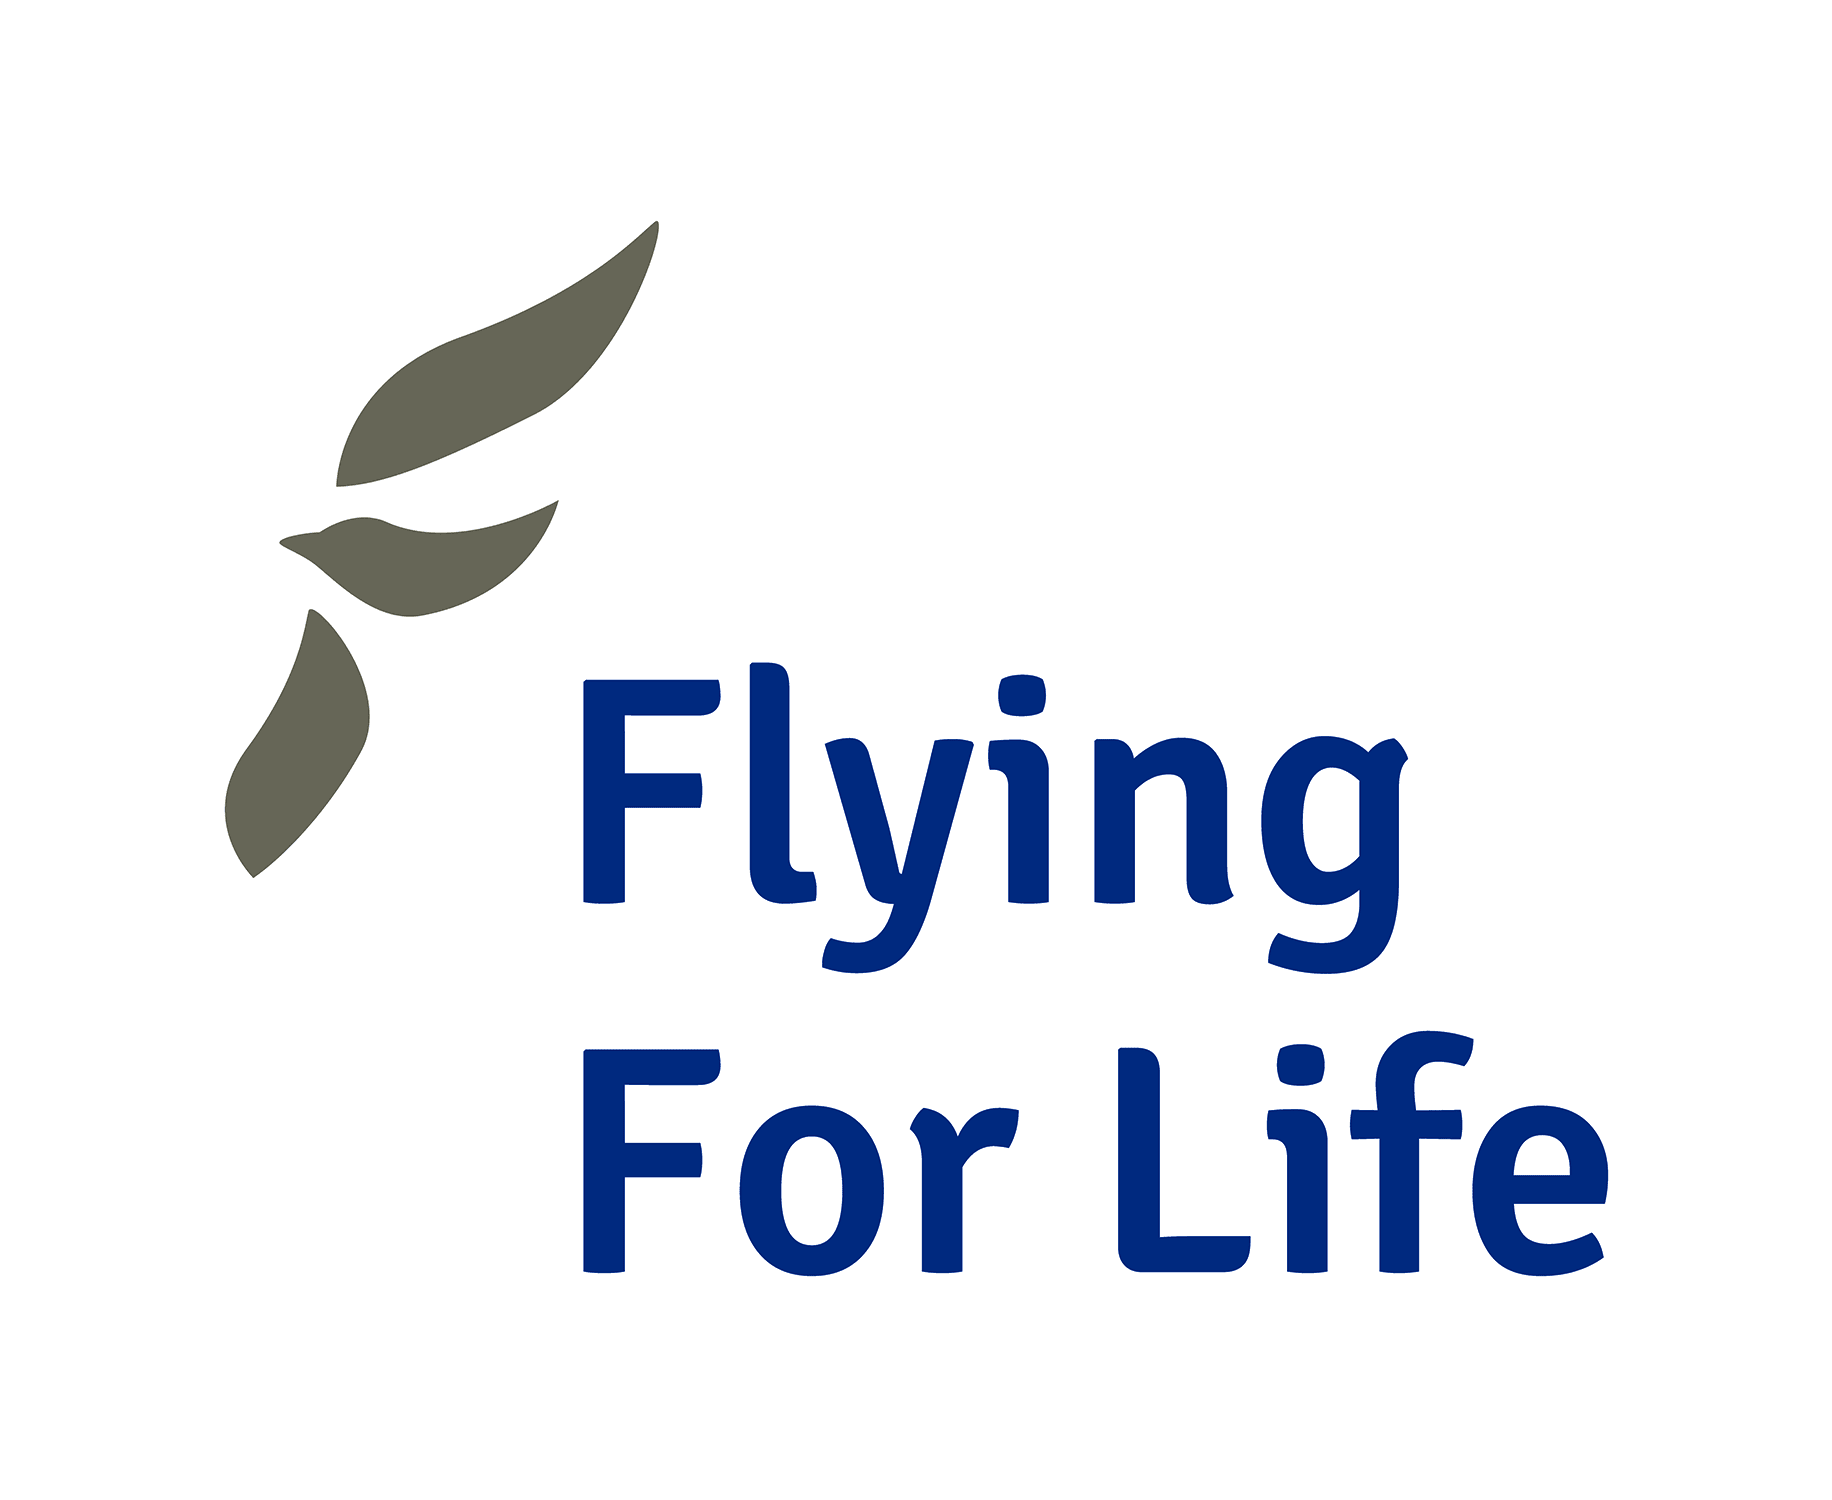 Flying for life